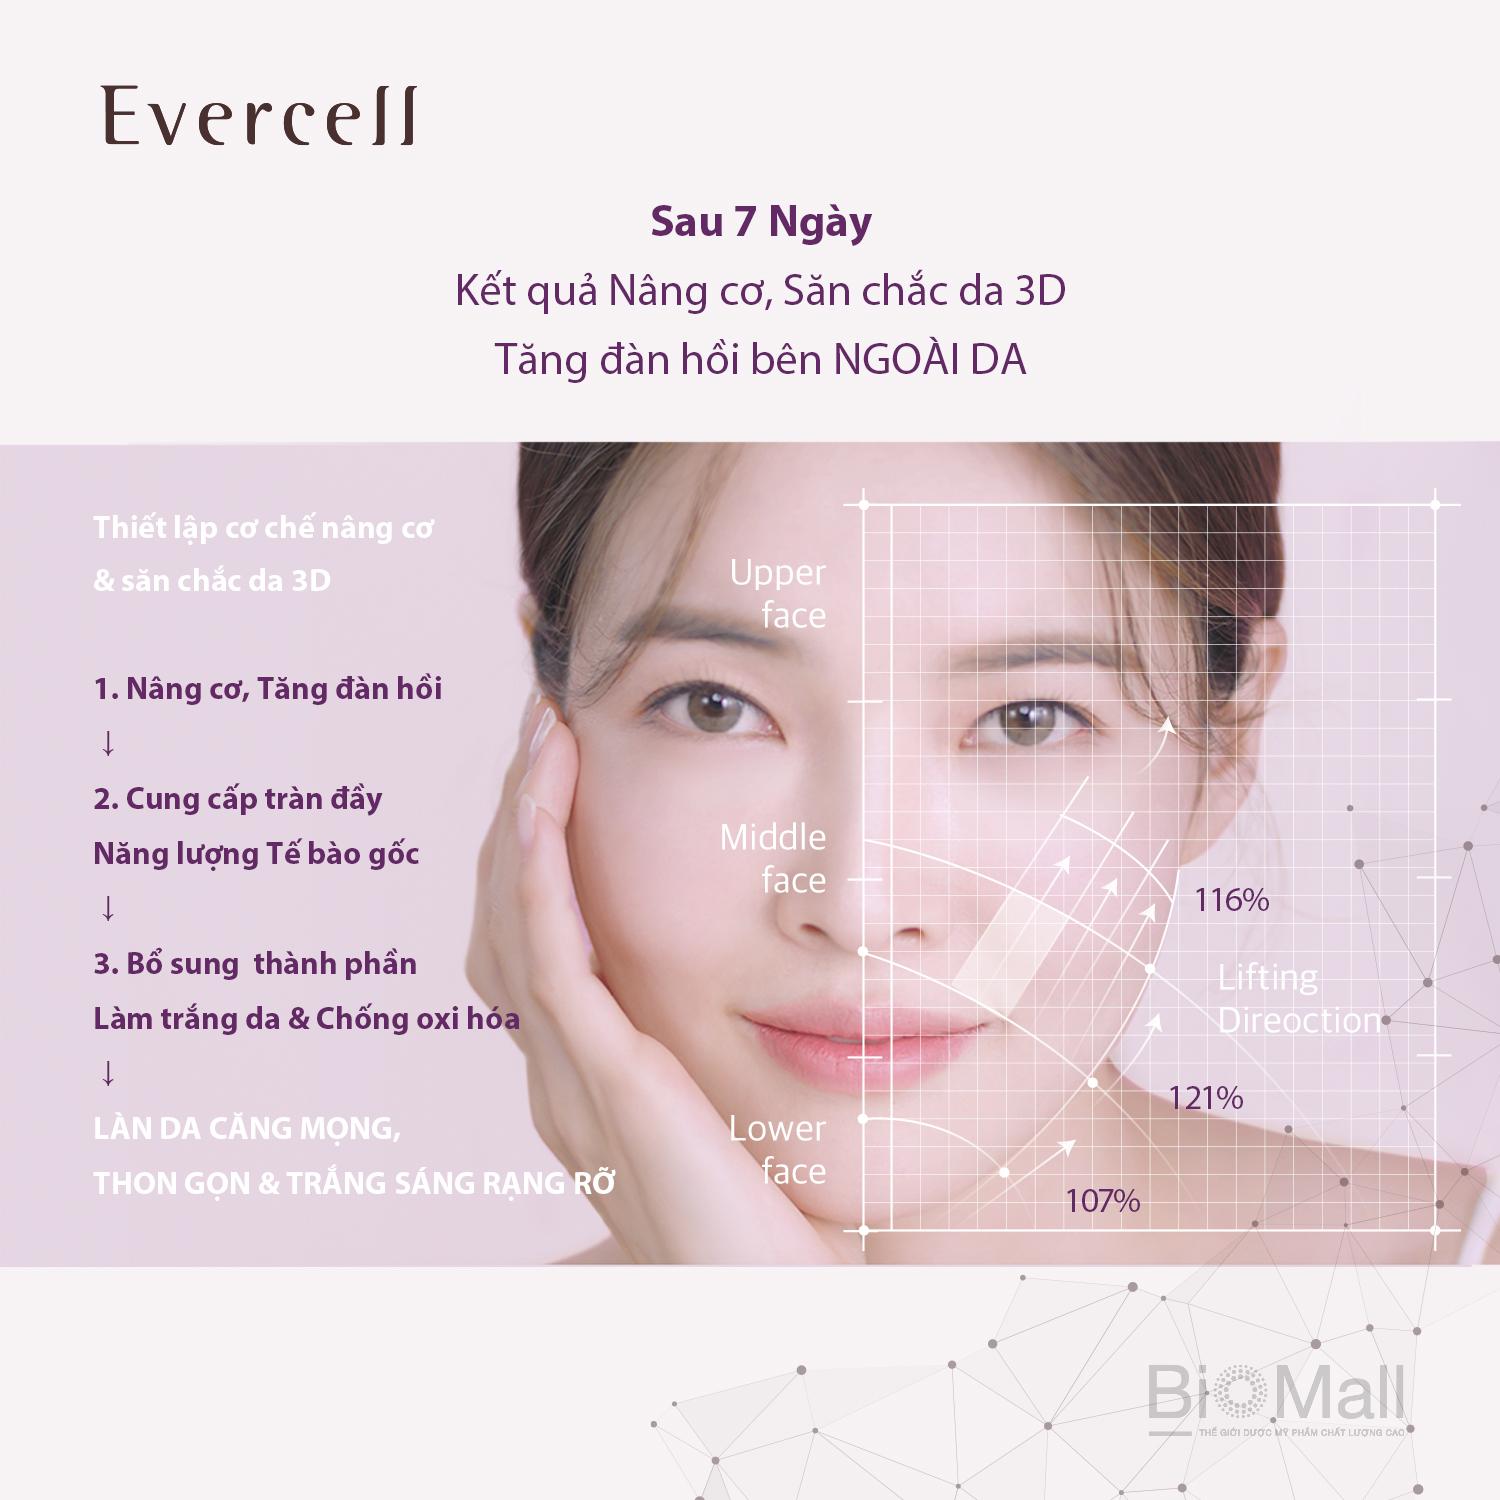 Evercell Radiance Lifting Cream